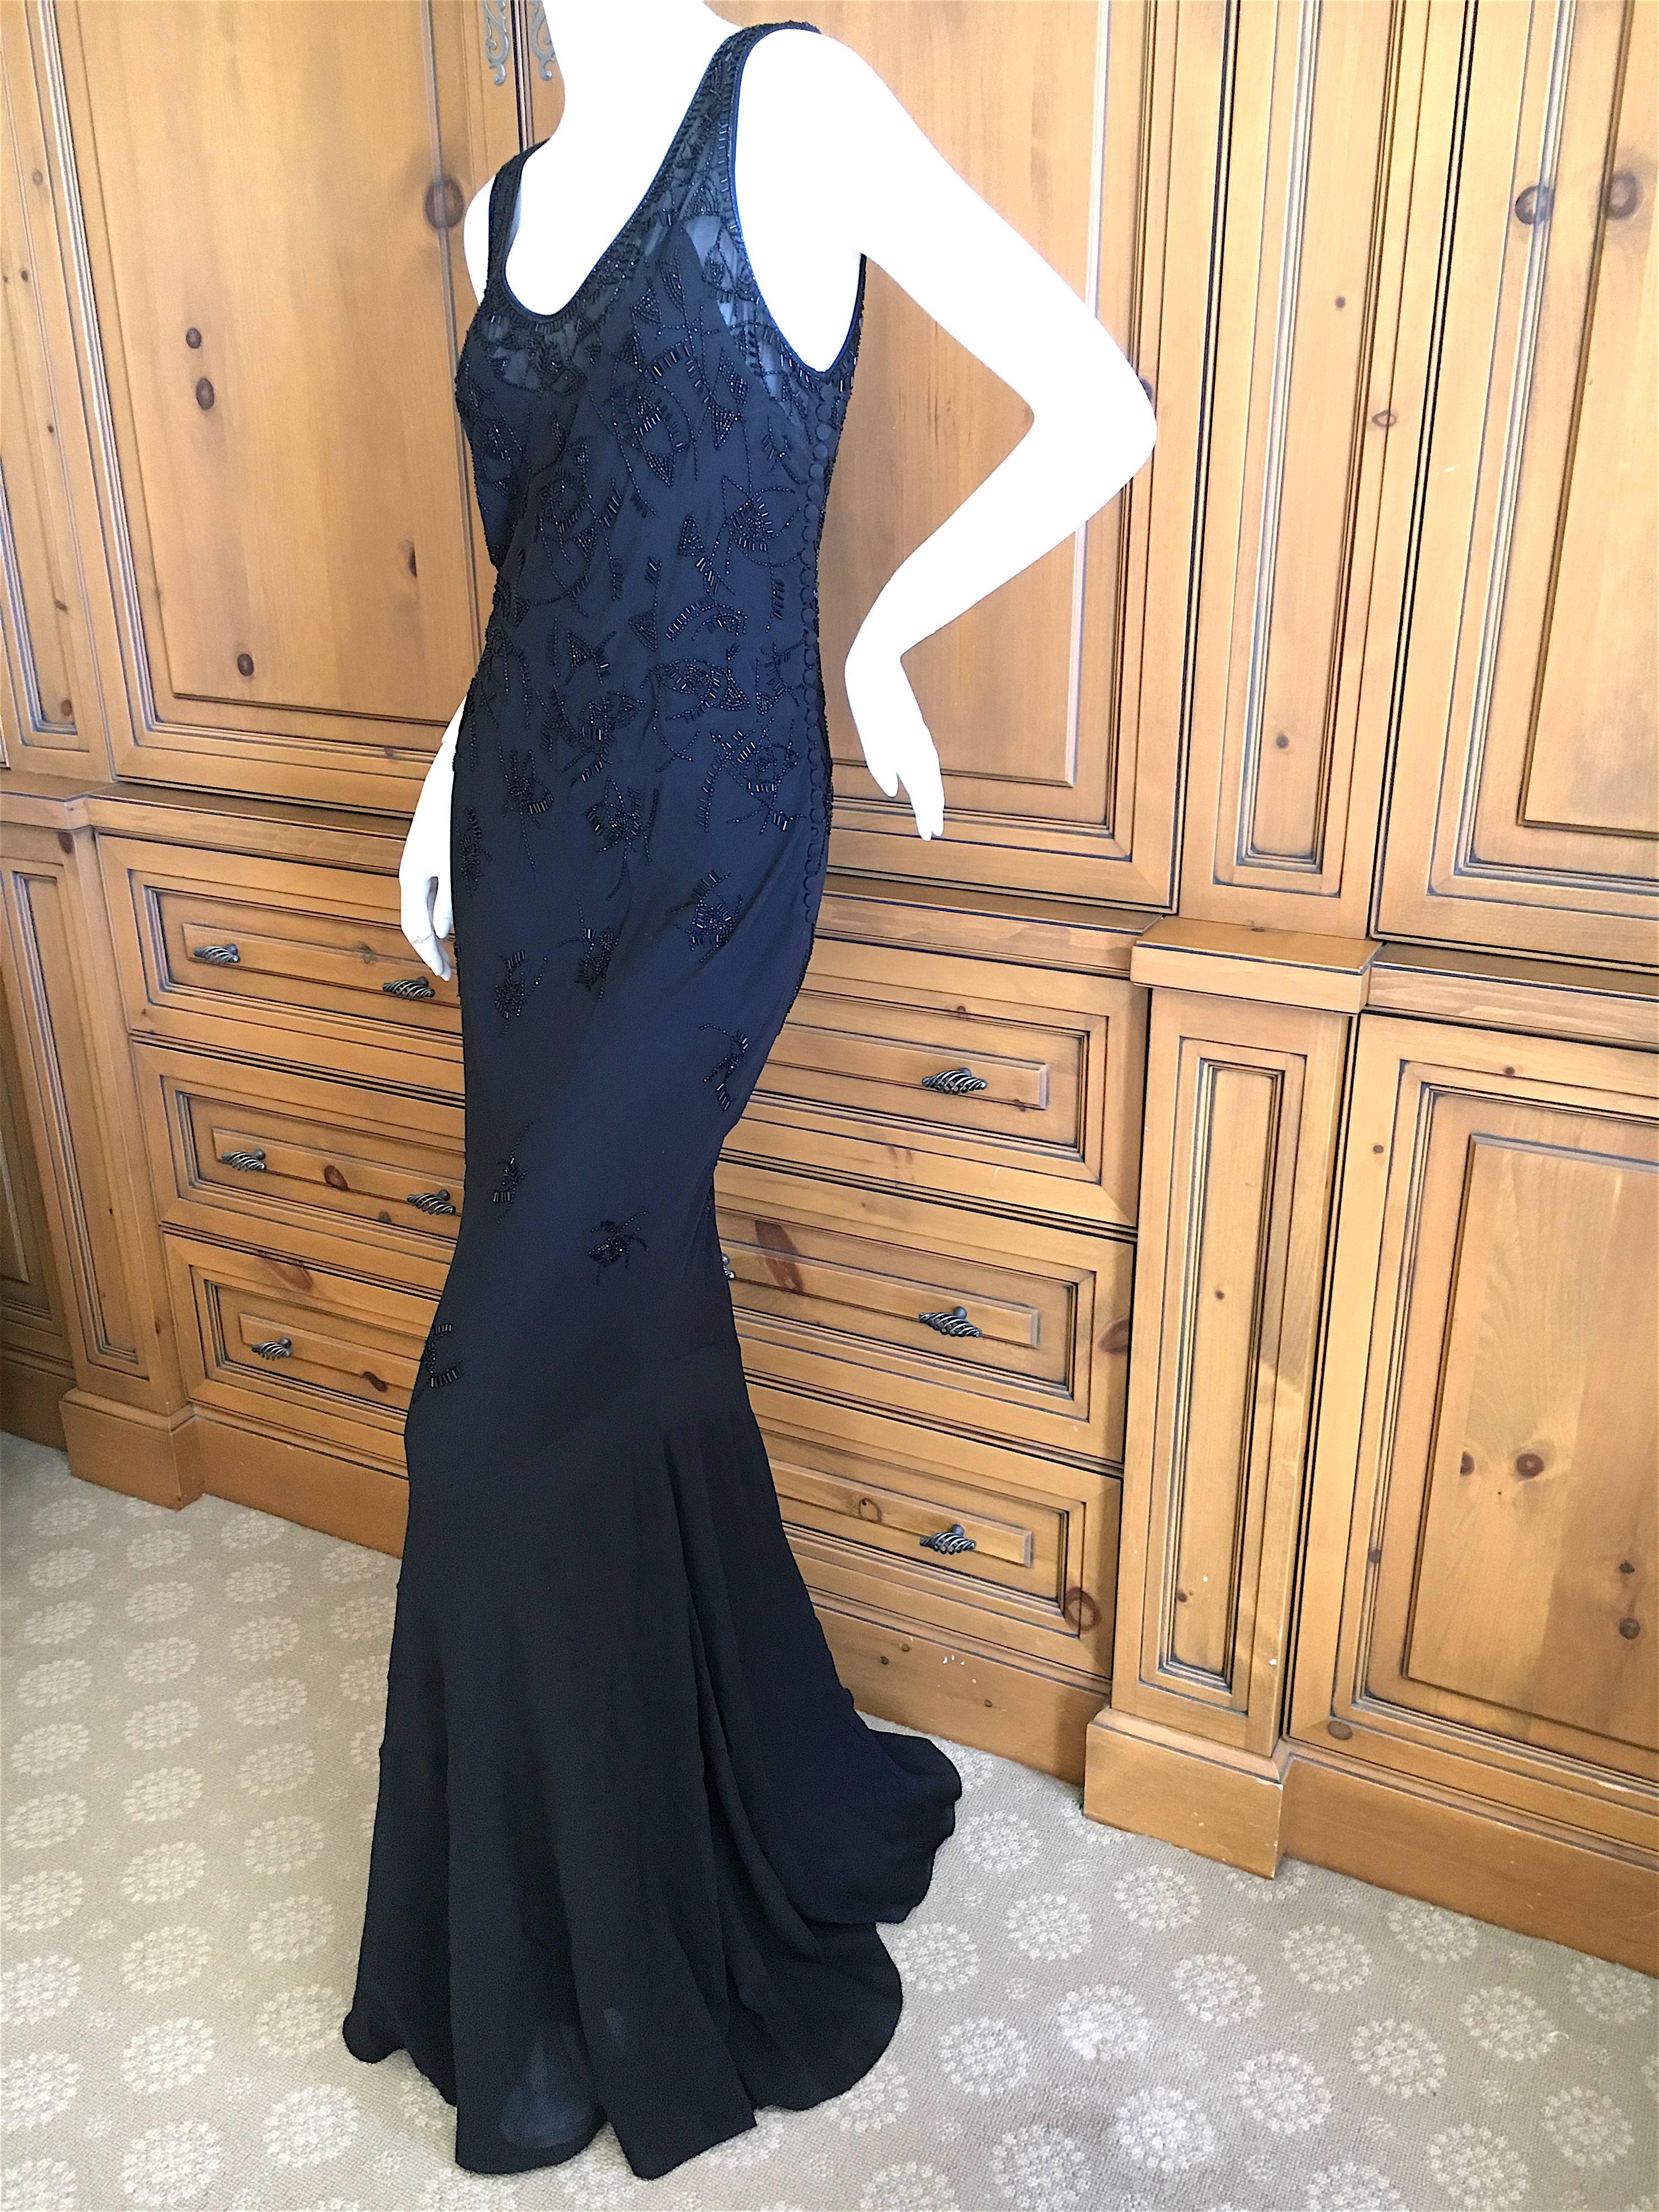 Christian Dior by John Galliano Bead Embellished Black Evening Dress For Sale 5